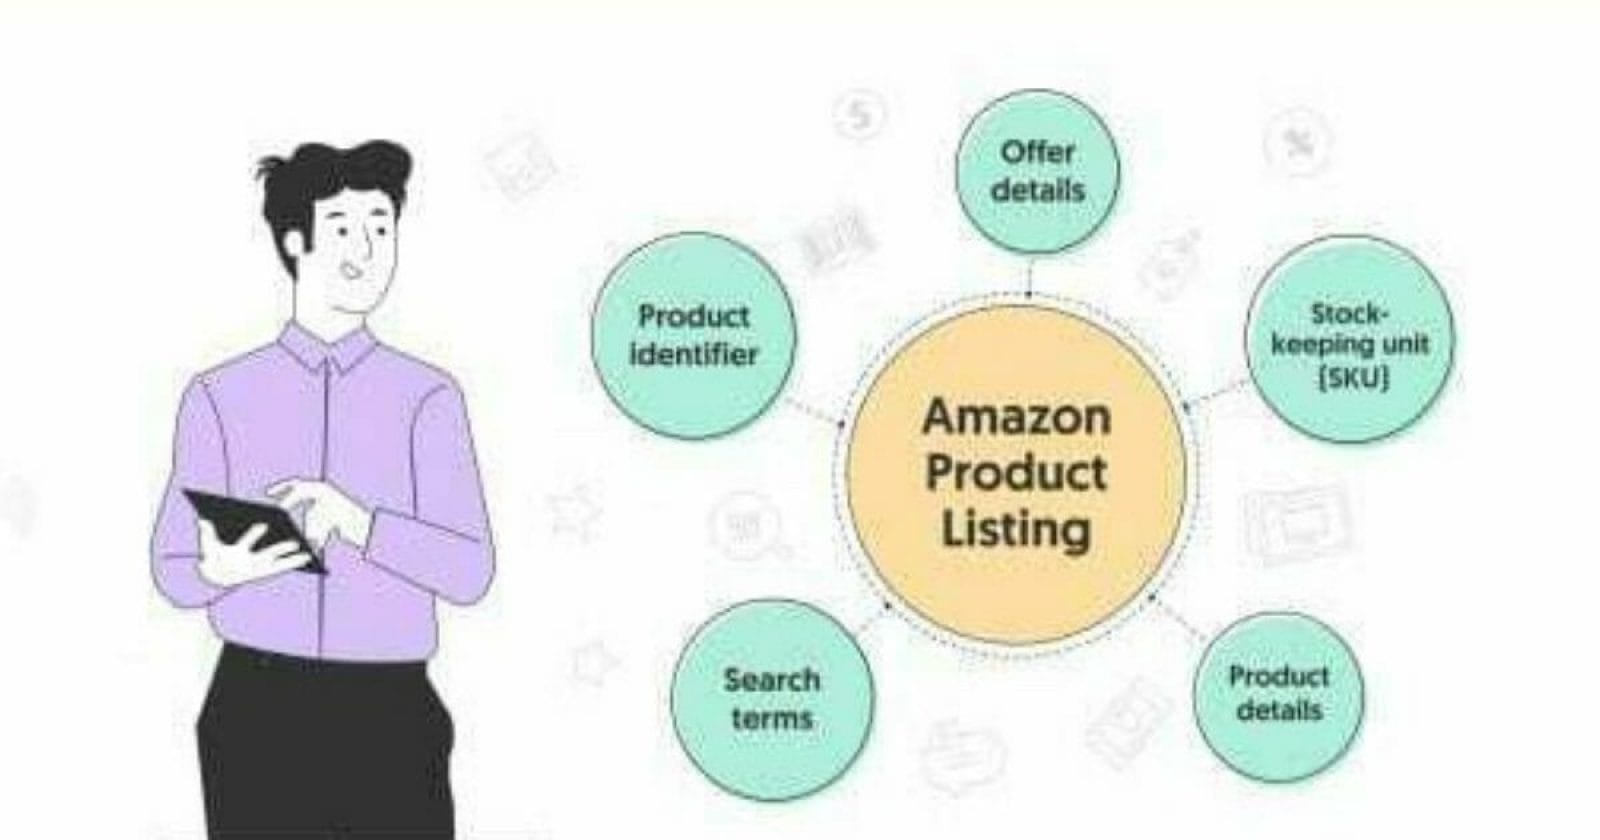 How to write a product title that fits the Amazon Character Limit